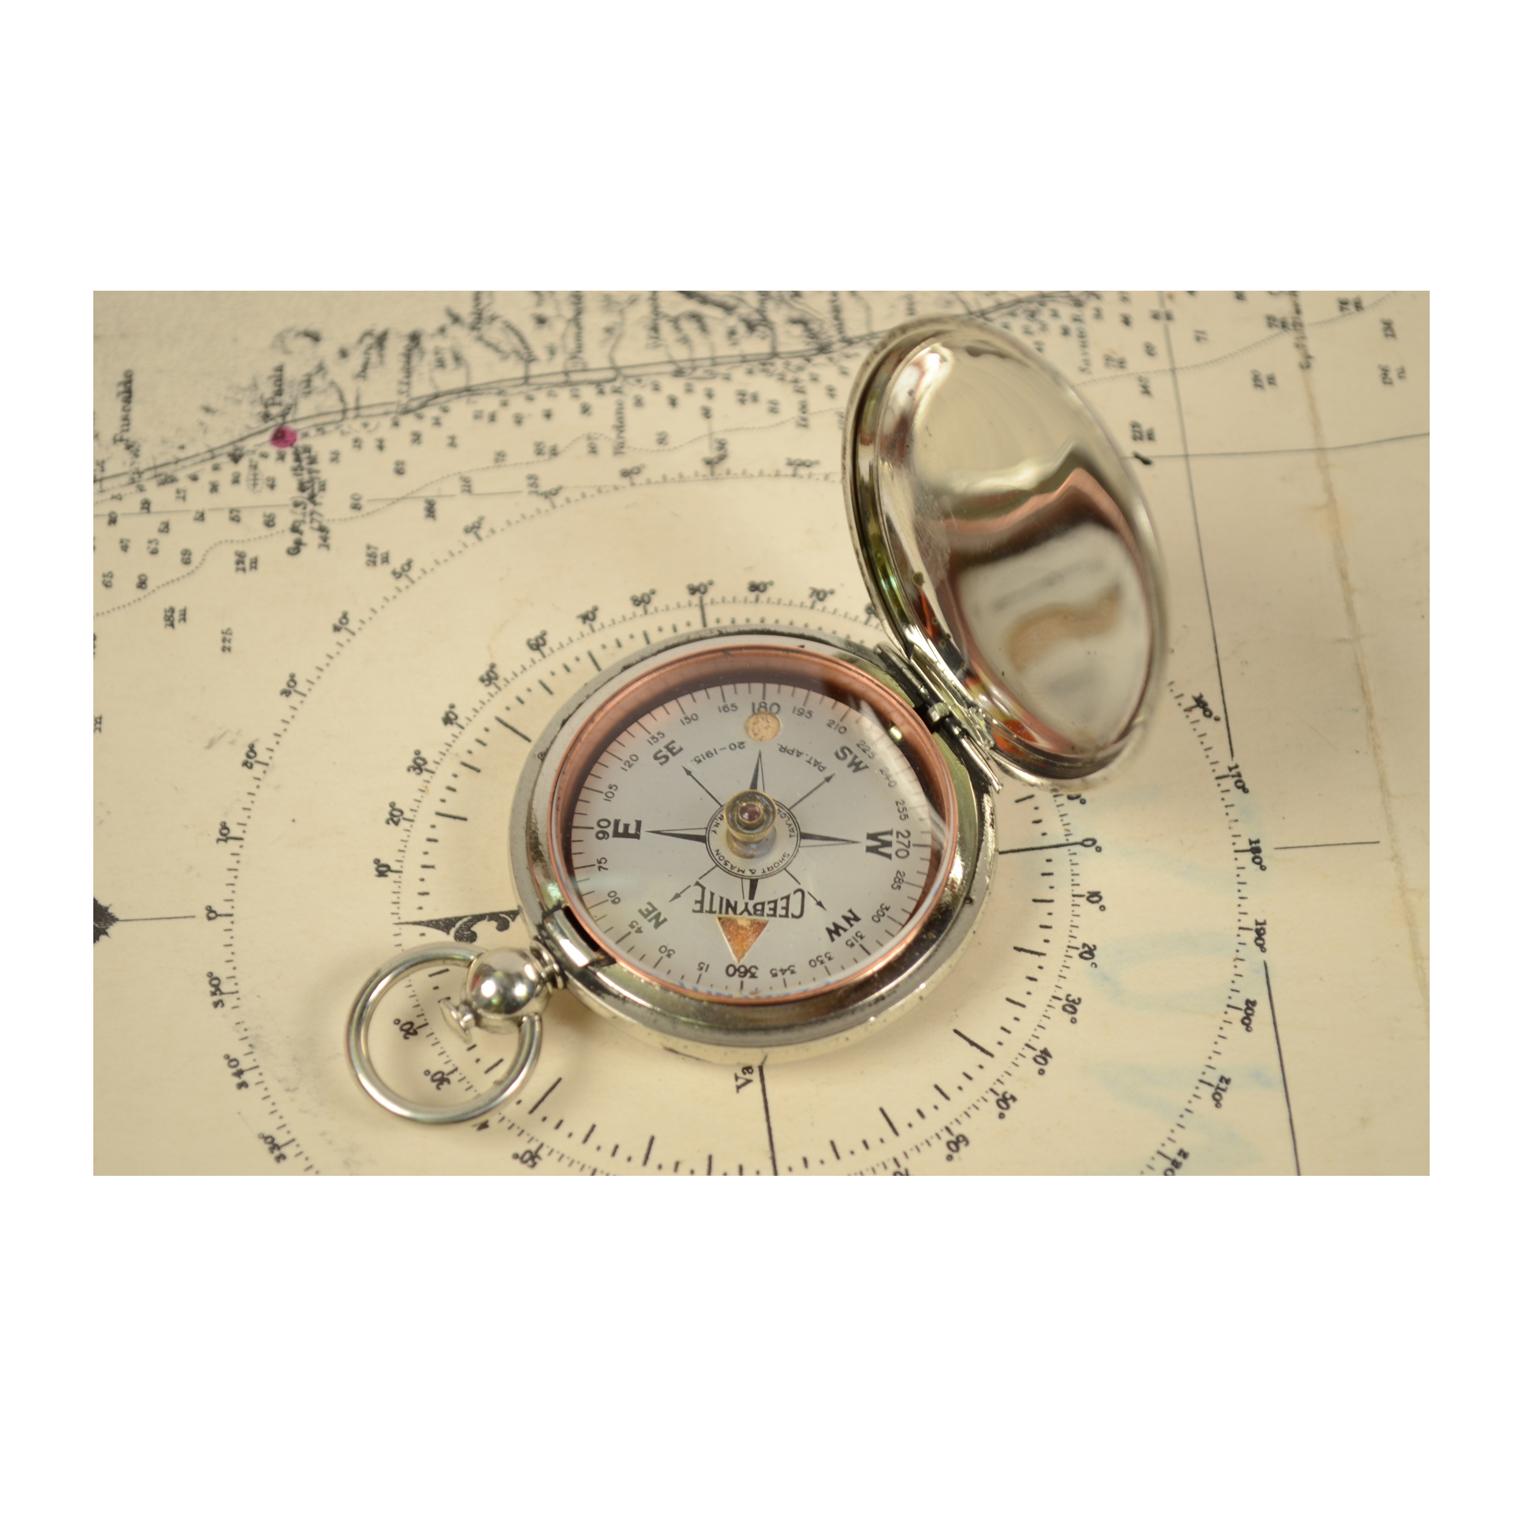 Pocket compass used by American aviation officers in 1915 made of brass with the shape of a pocket watch, signed Ceebynite Short & Mason Taylor Rochester. The compass has a lid with snap closure with release button inside the ring. Four-winds